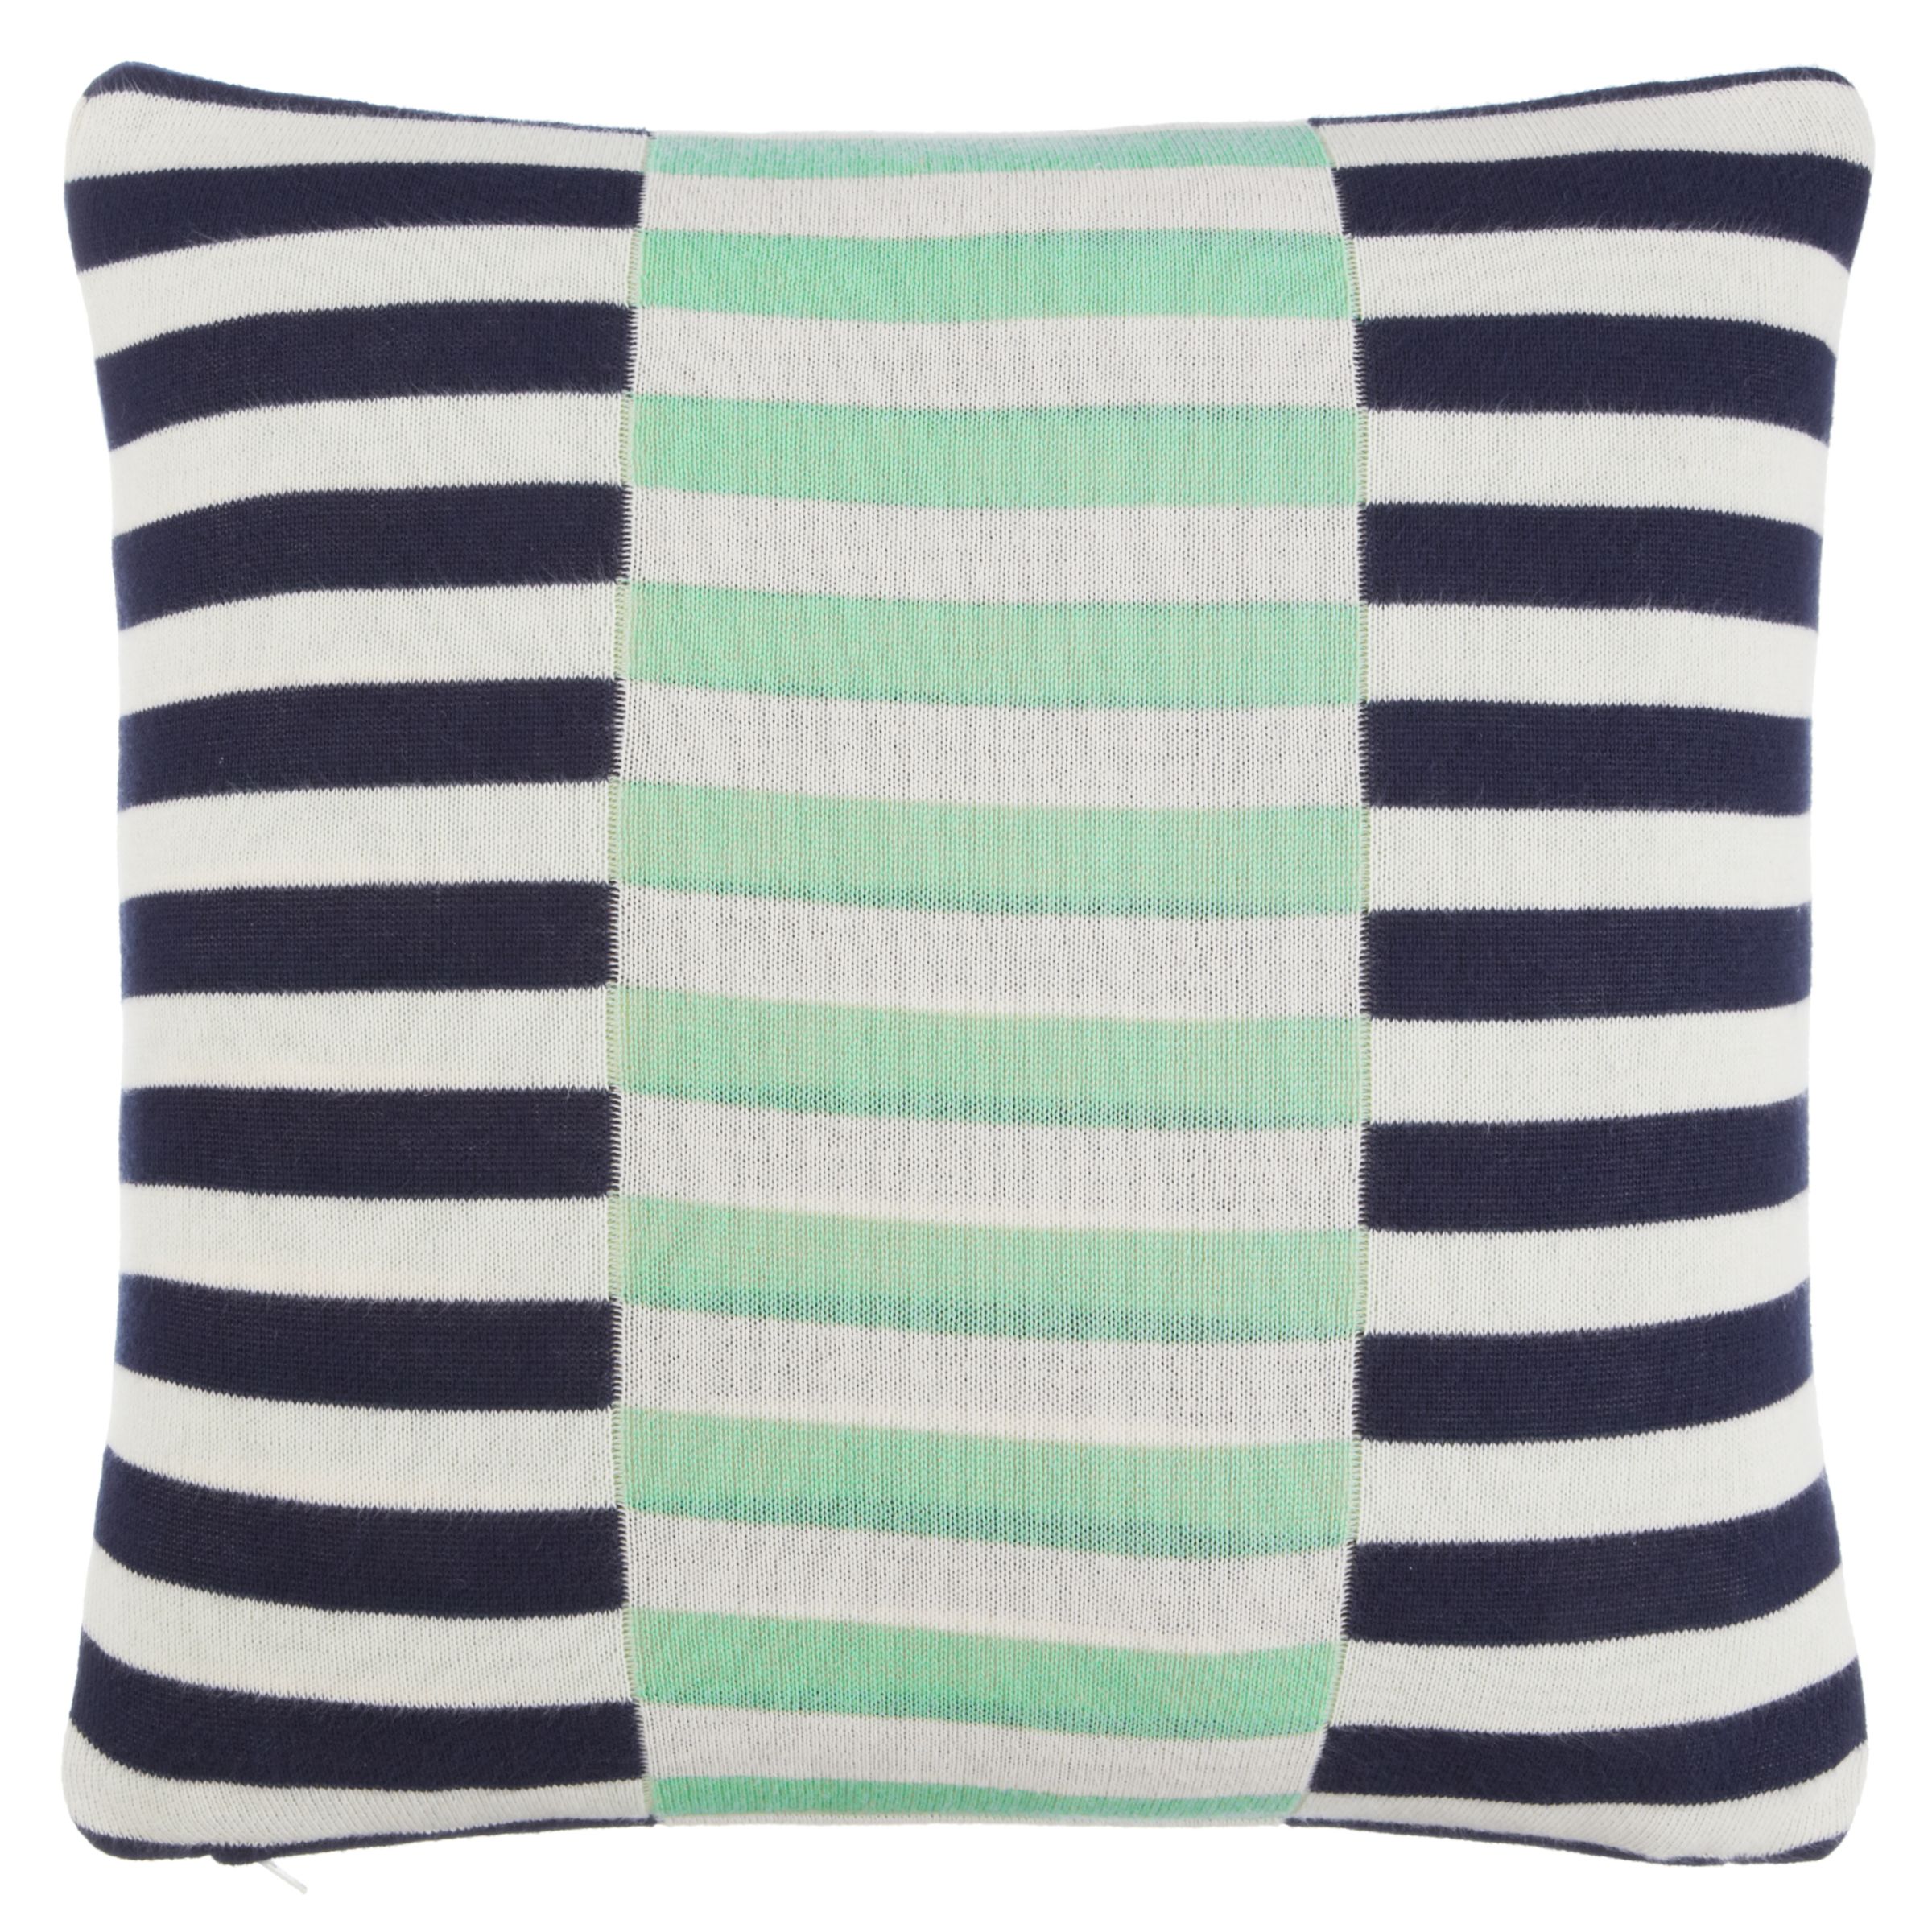 House by John Lewis Dominoes Cushion, Navy / Mint